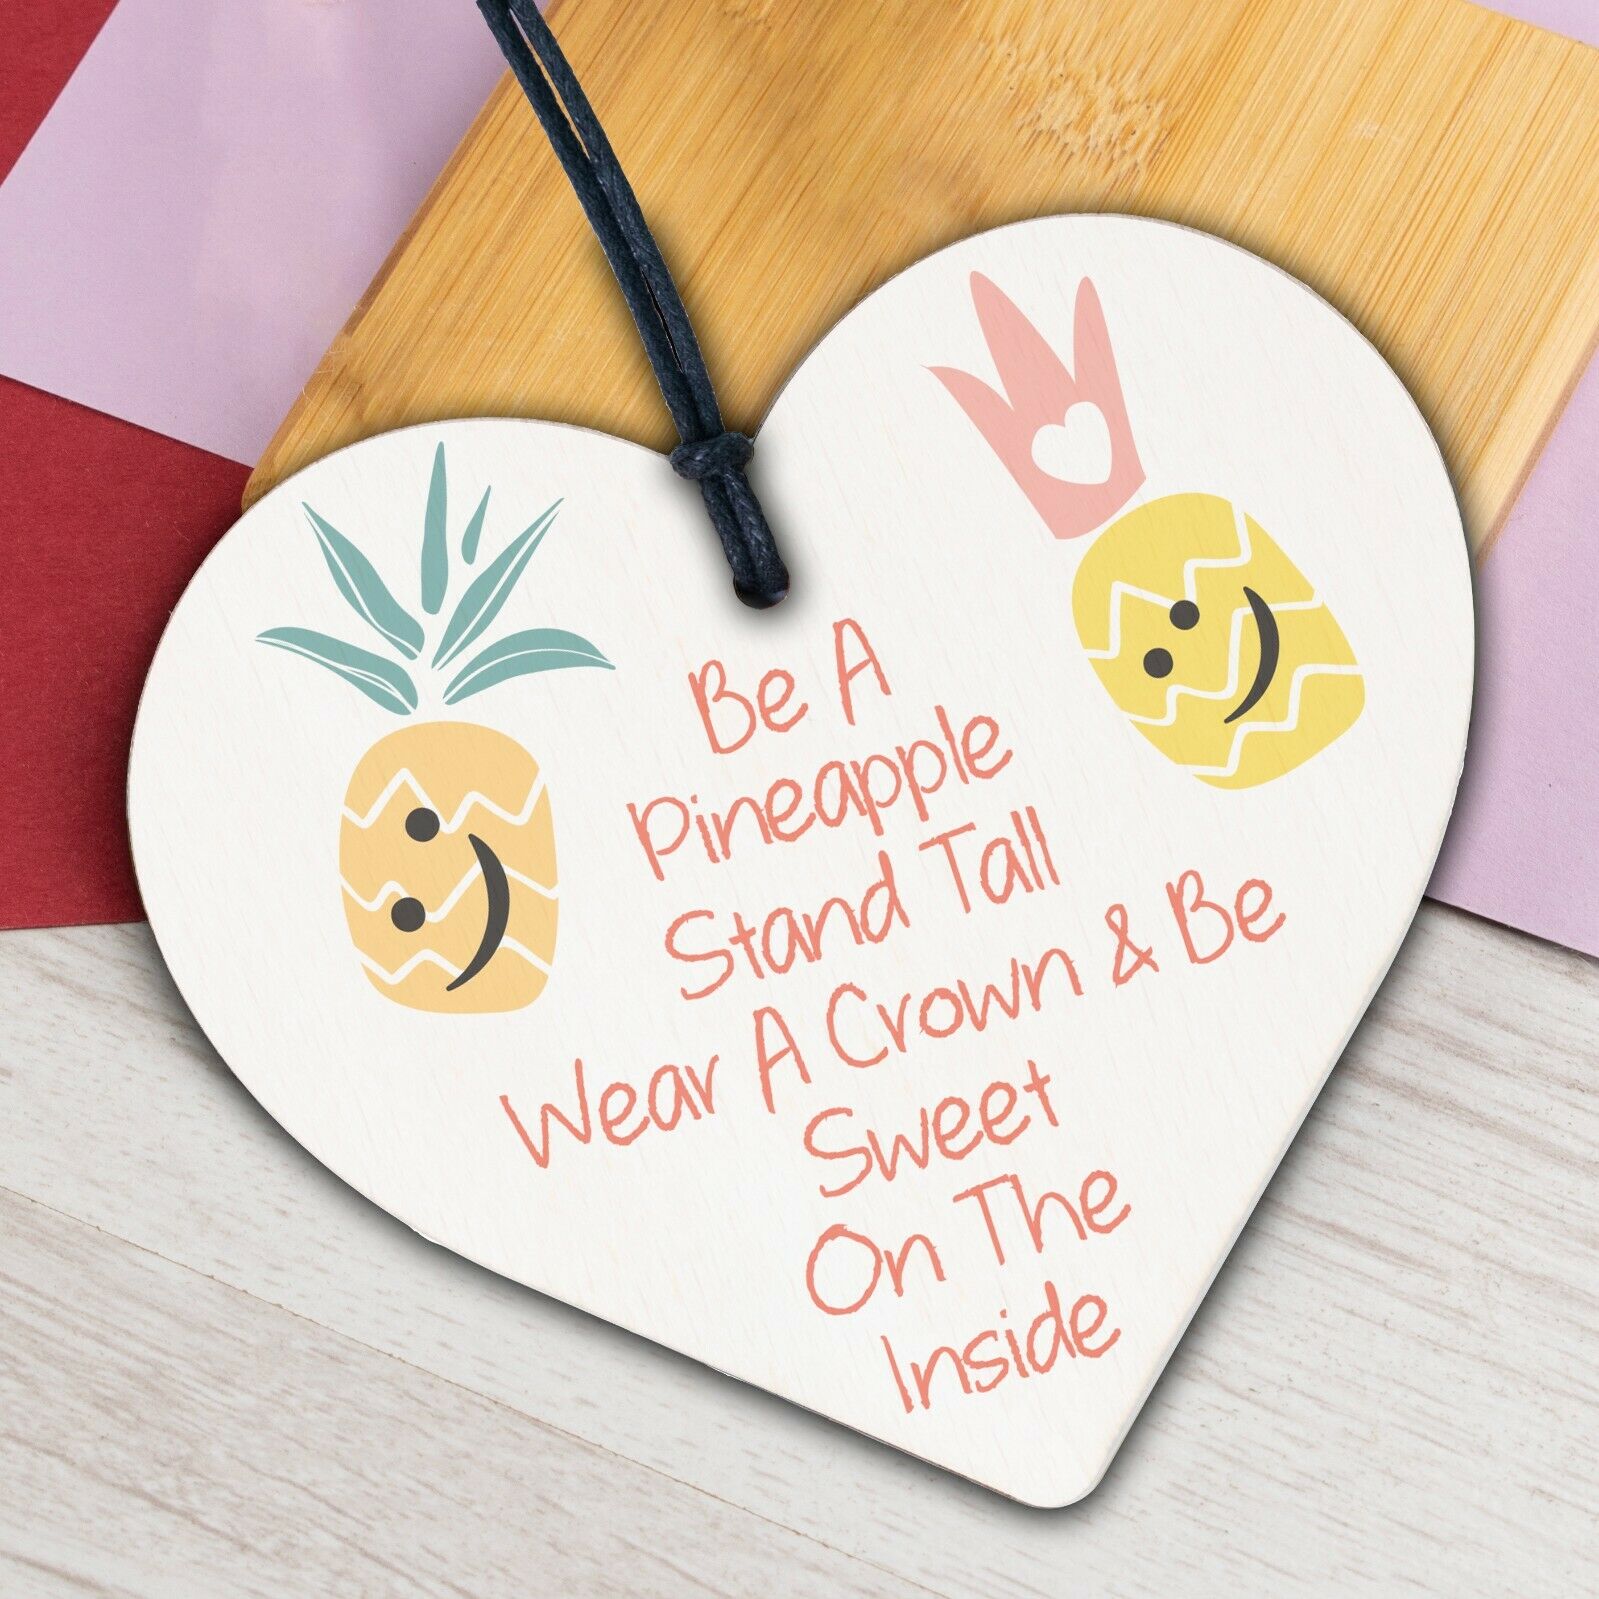 Be A Pineapple Novelty Wooden Hanging Heart Plaque Sign Funny Friendship Gift